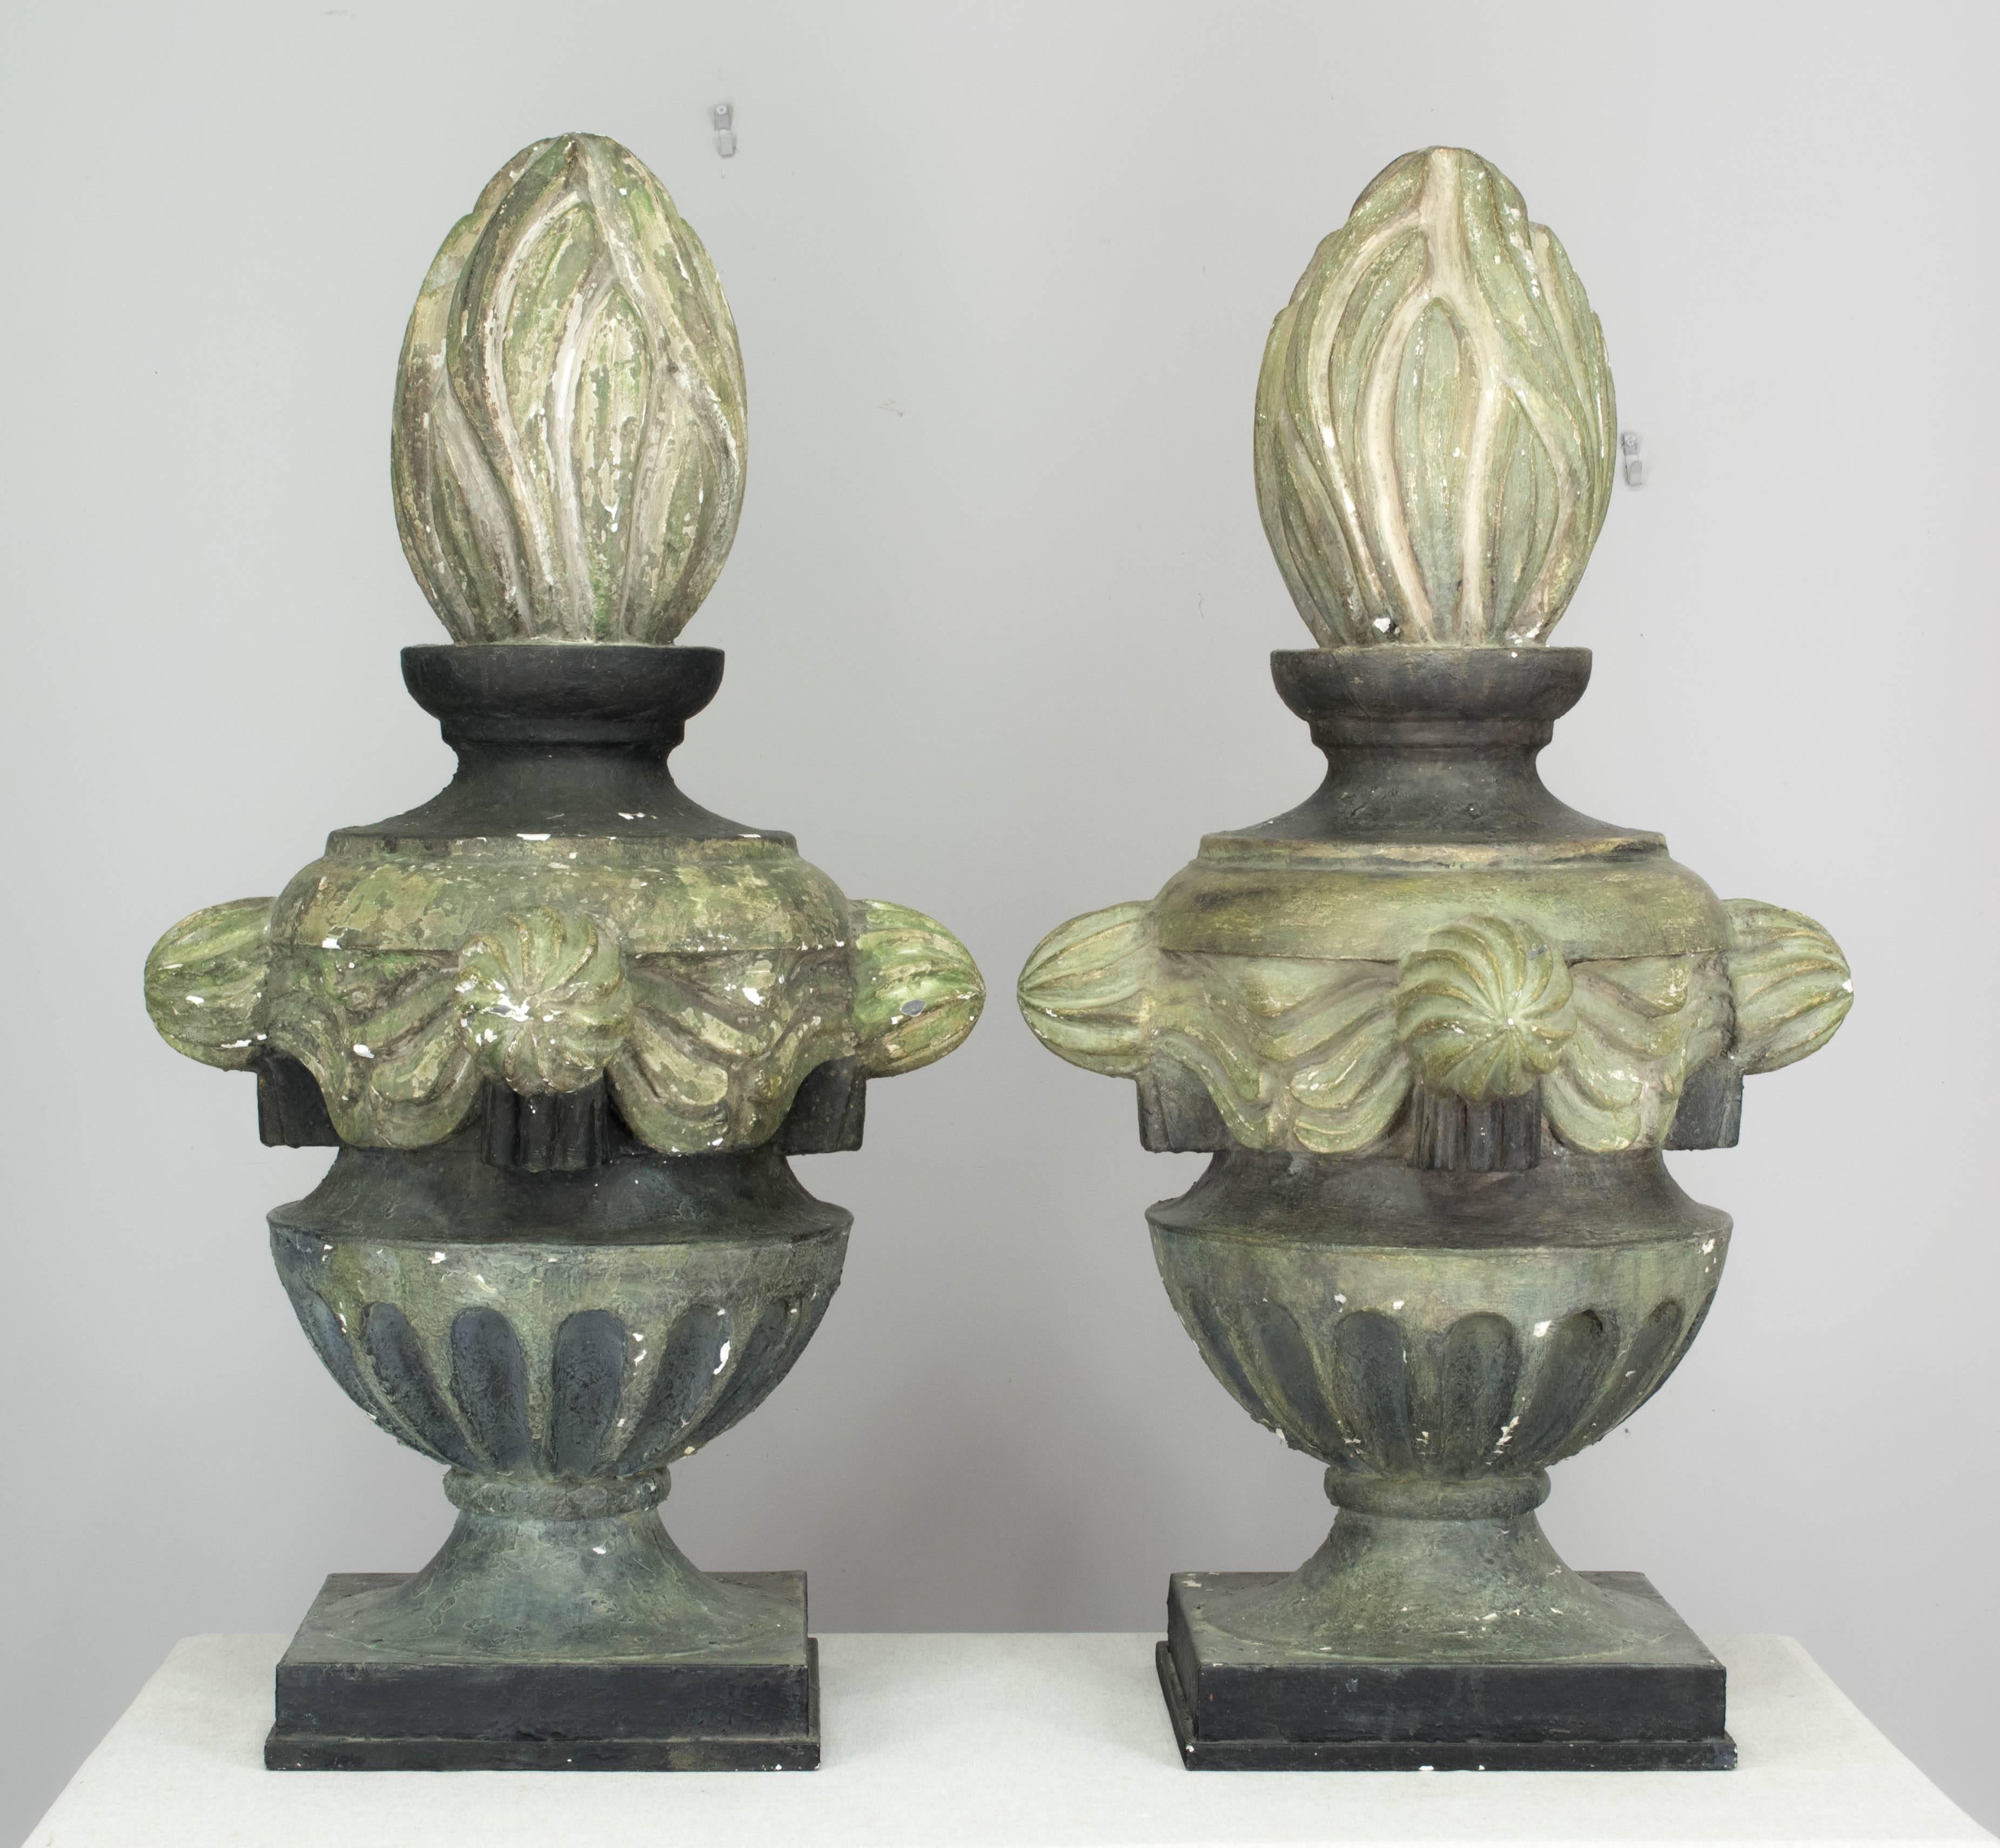 20th Century Pair of French Zinc Architectural Finials